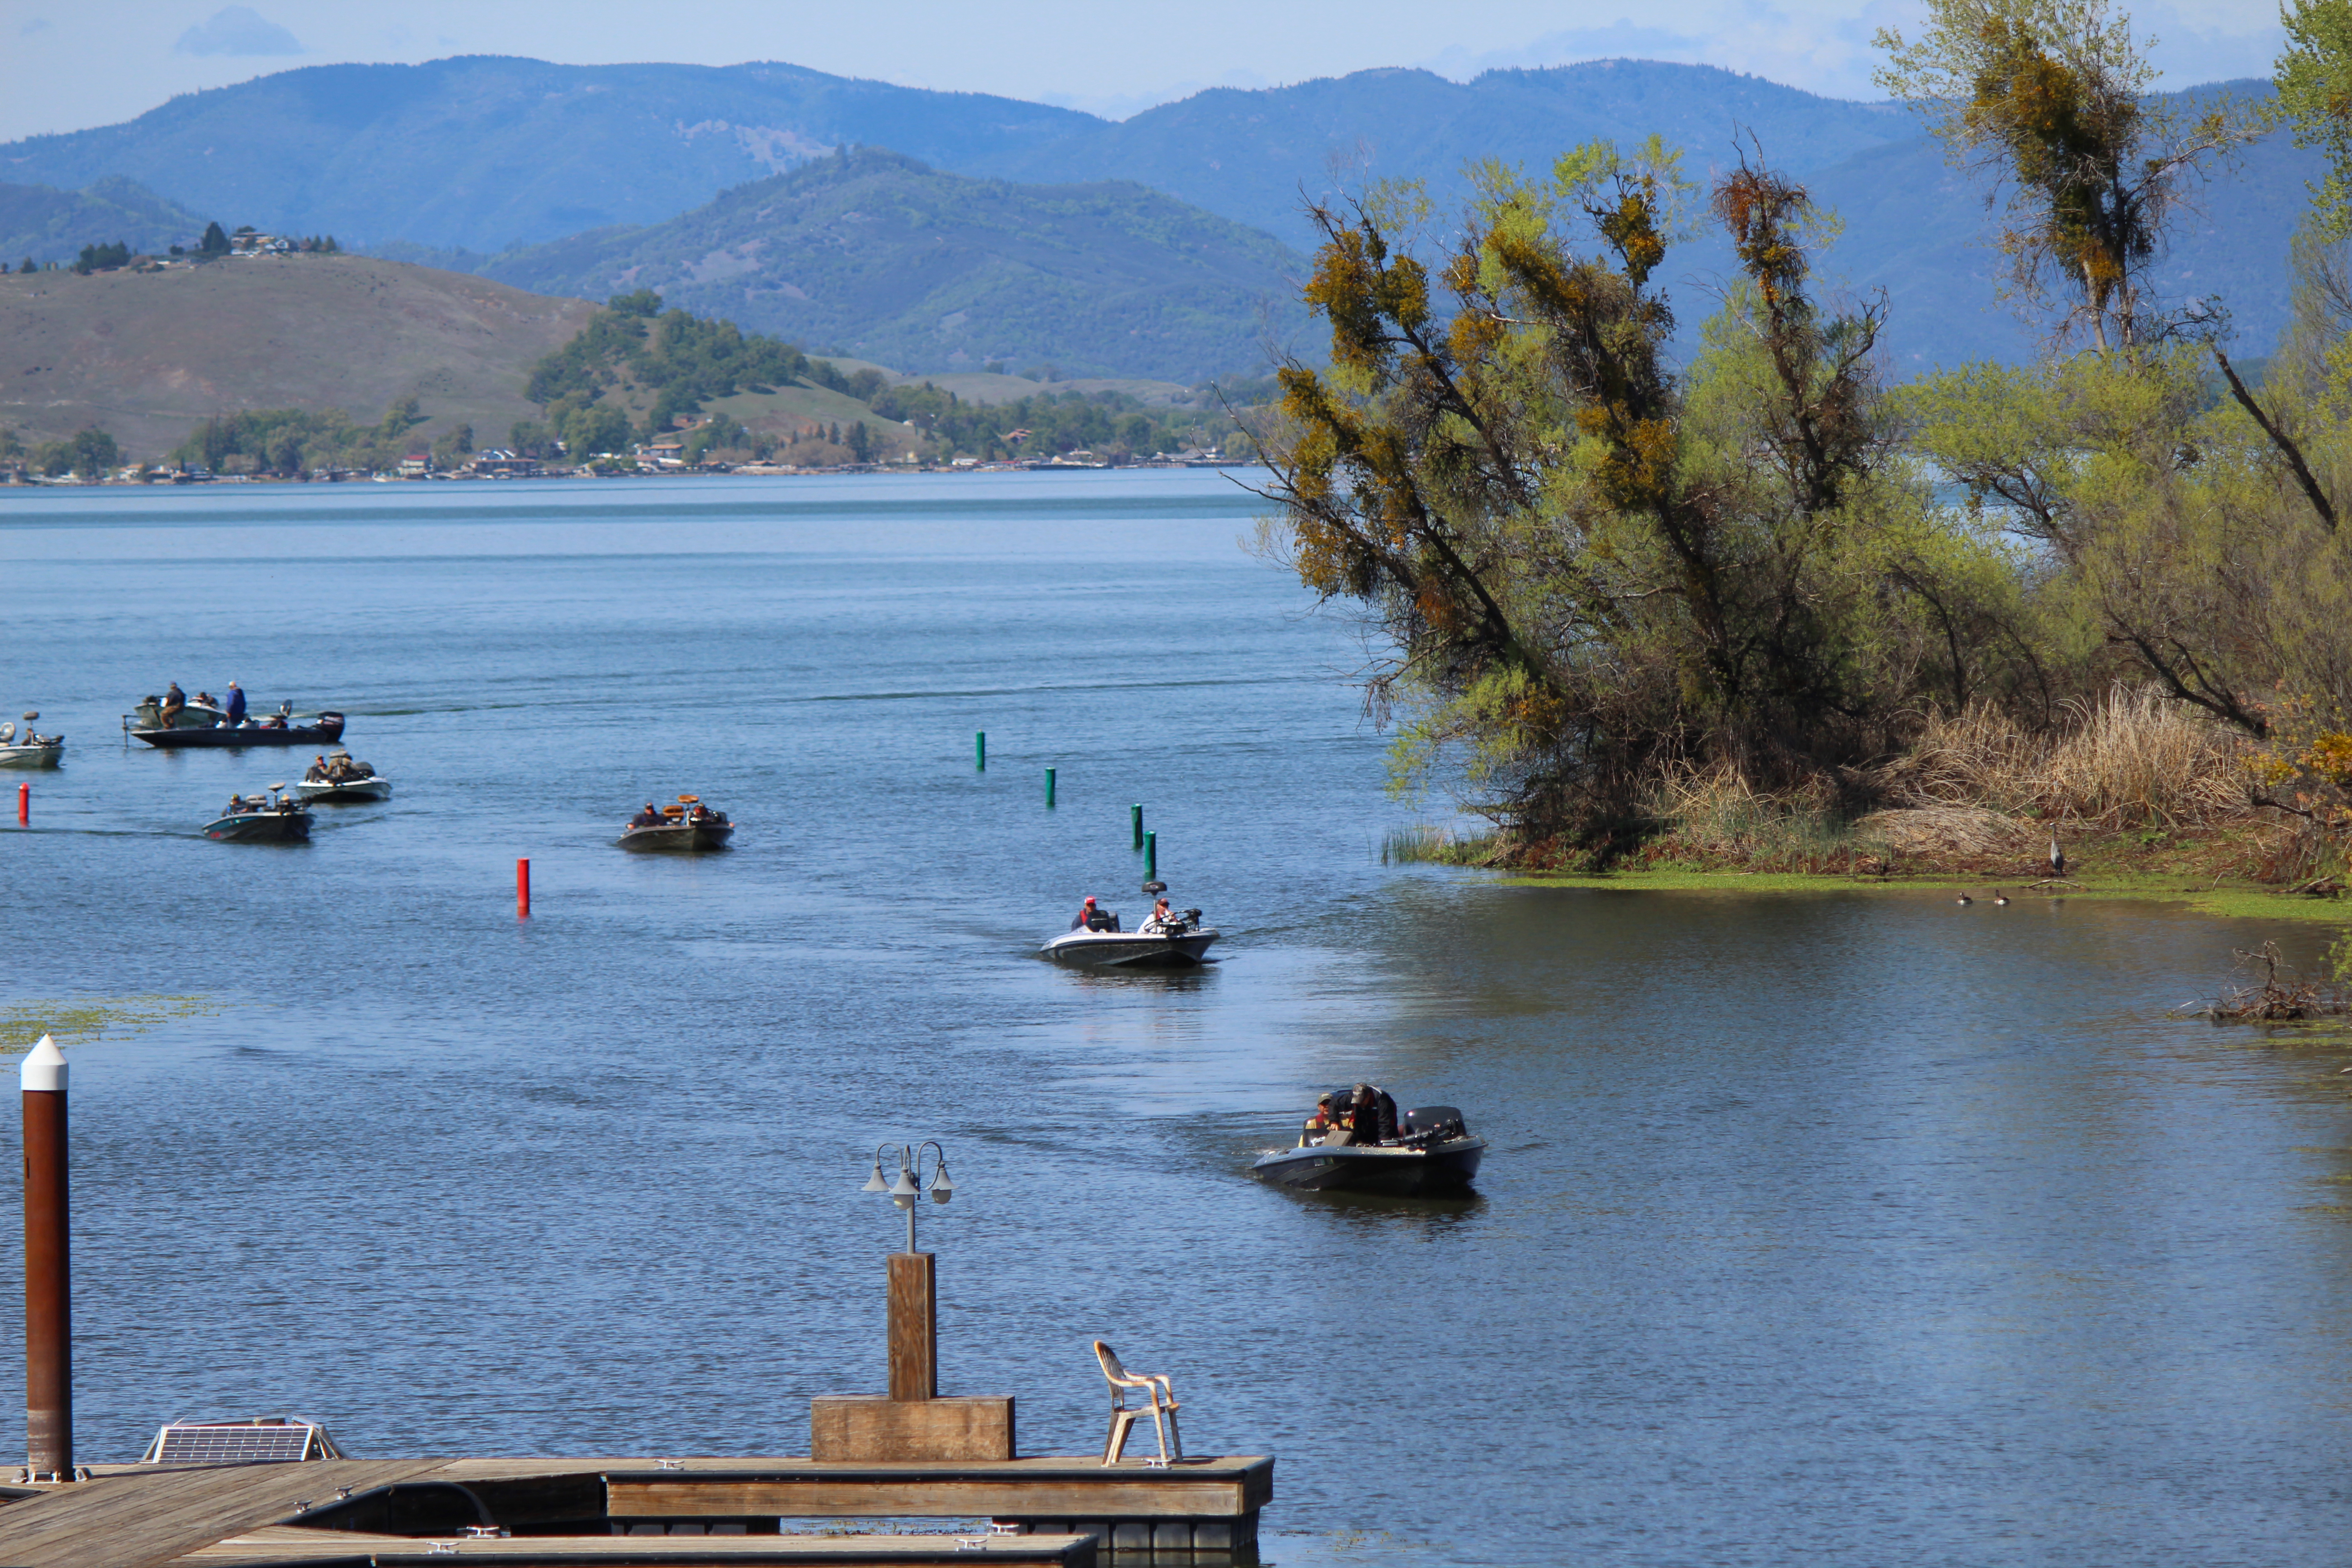 Clear Lake State Park was the top California family boating spot per a national Top 100 list. Photo by Brian Lull